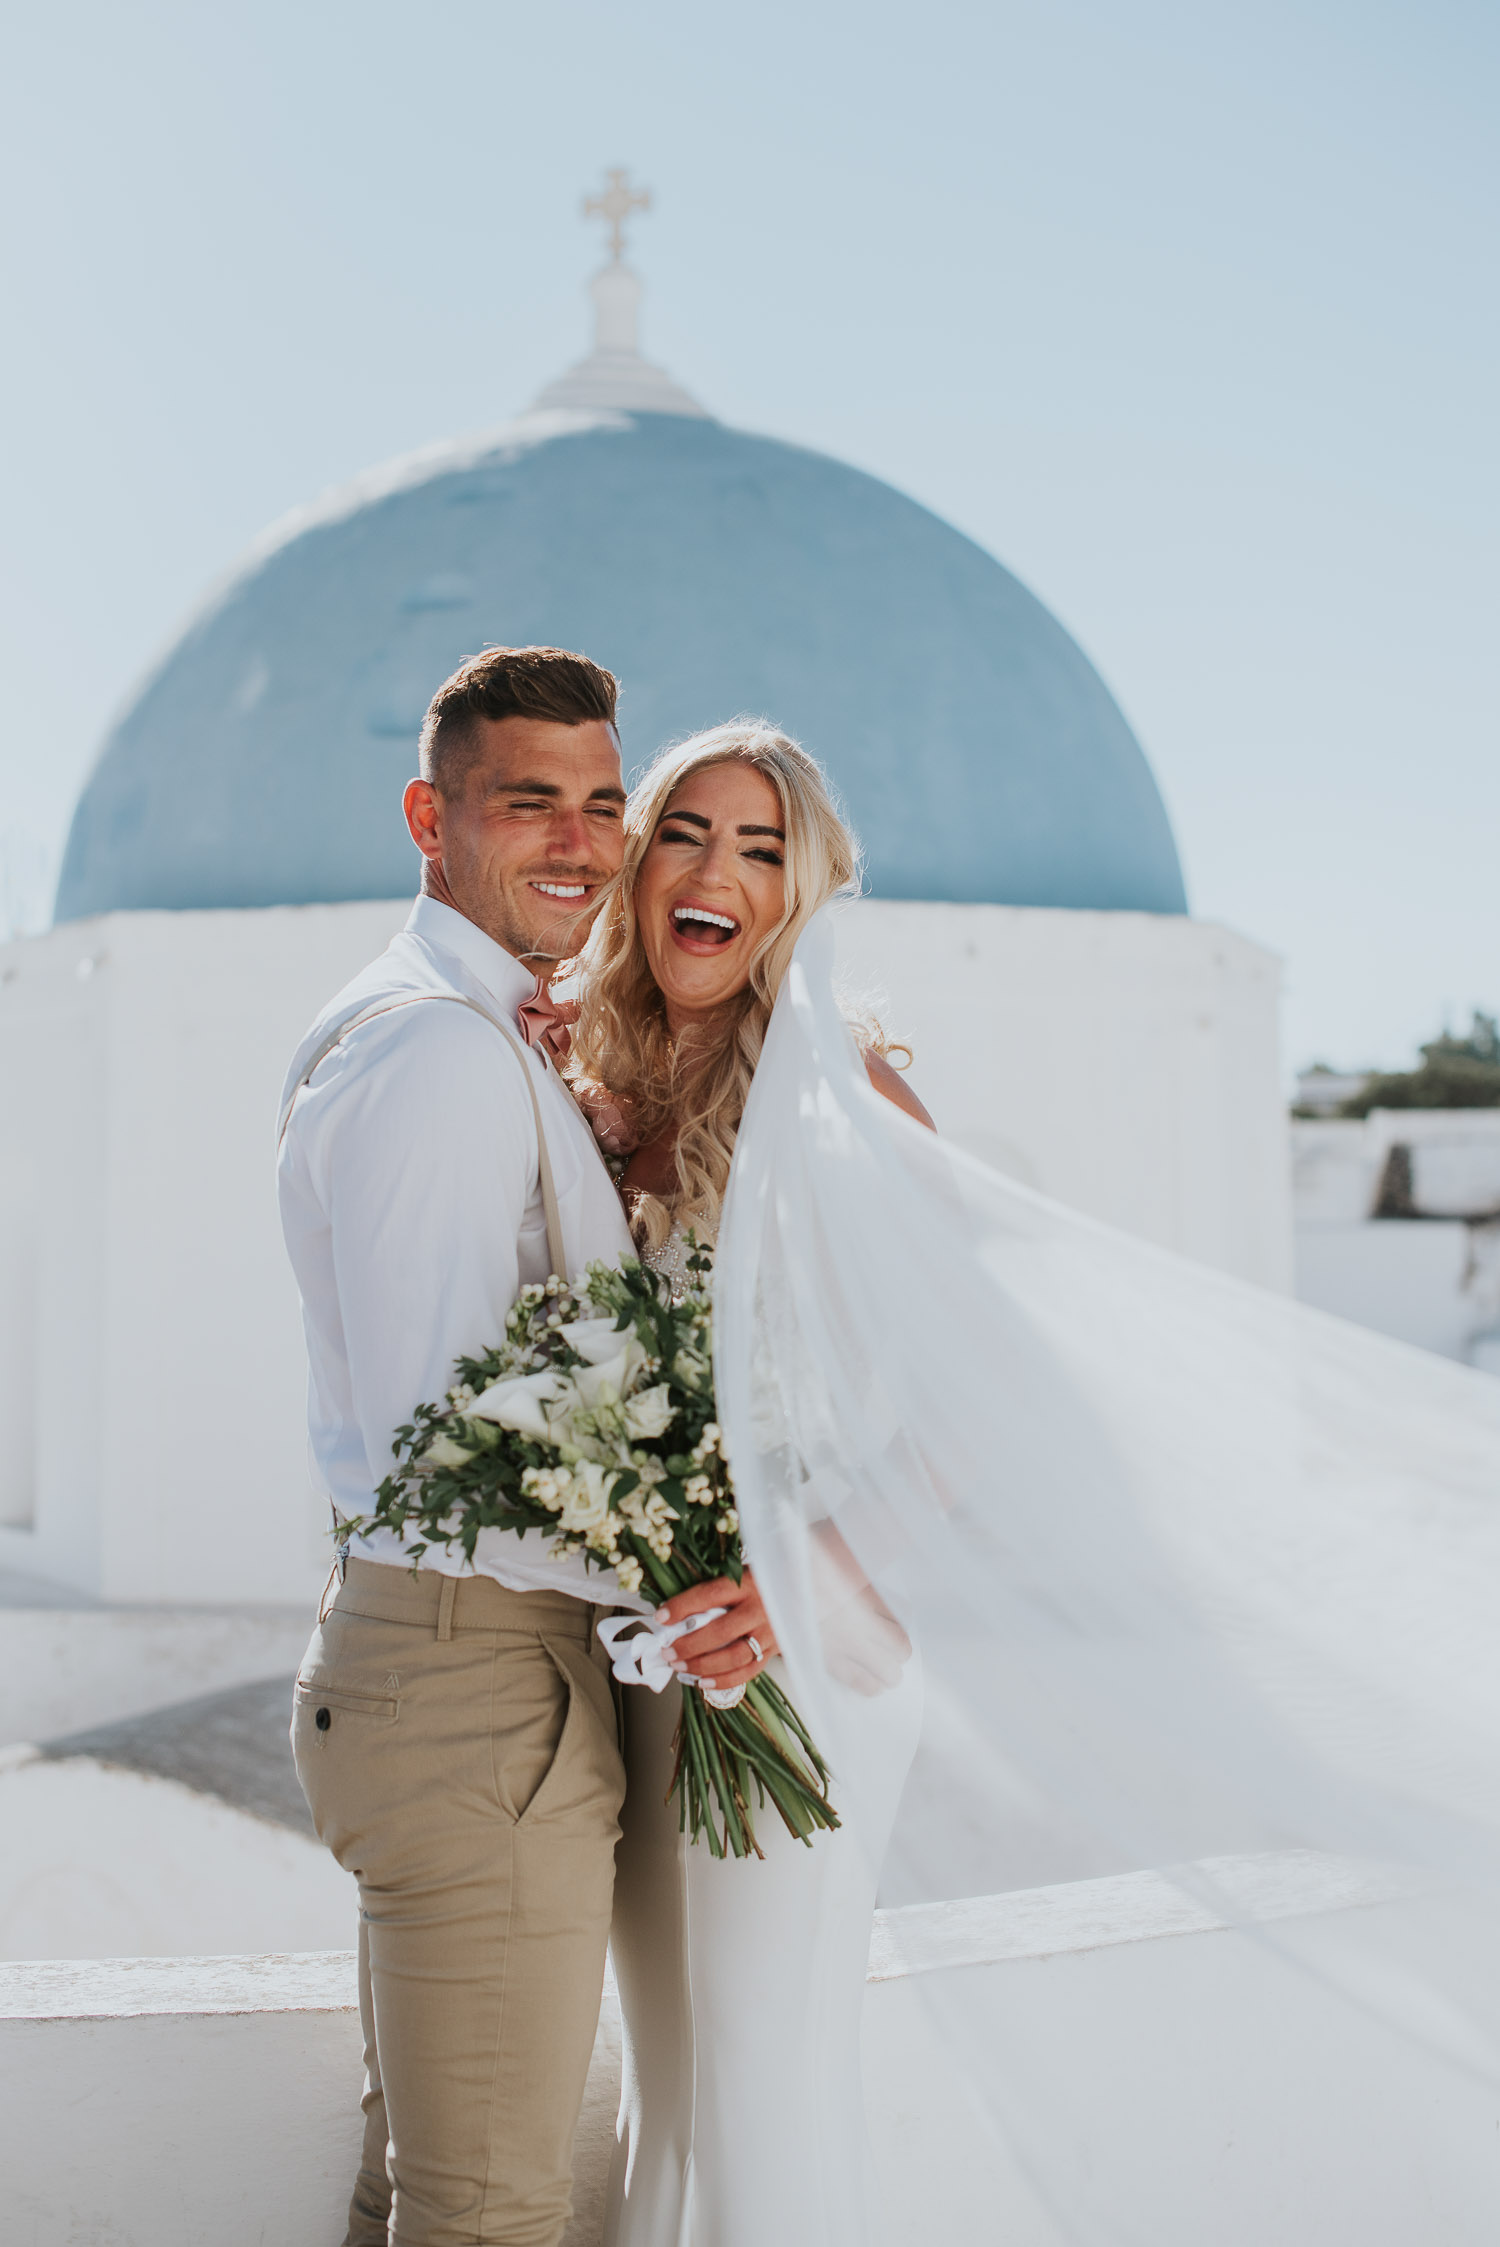 Wedding photographer Santorini captures bride and groom laughing with blue dome behind and the veil engulfing them. Pyrgos restaurant wedding by Ben and Vesna.